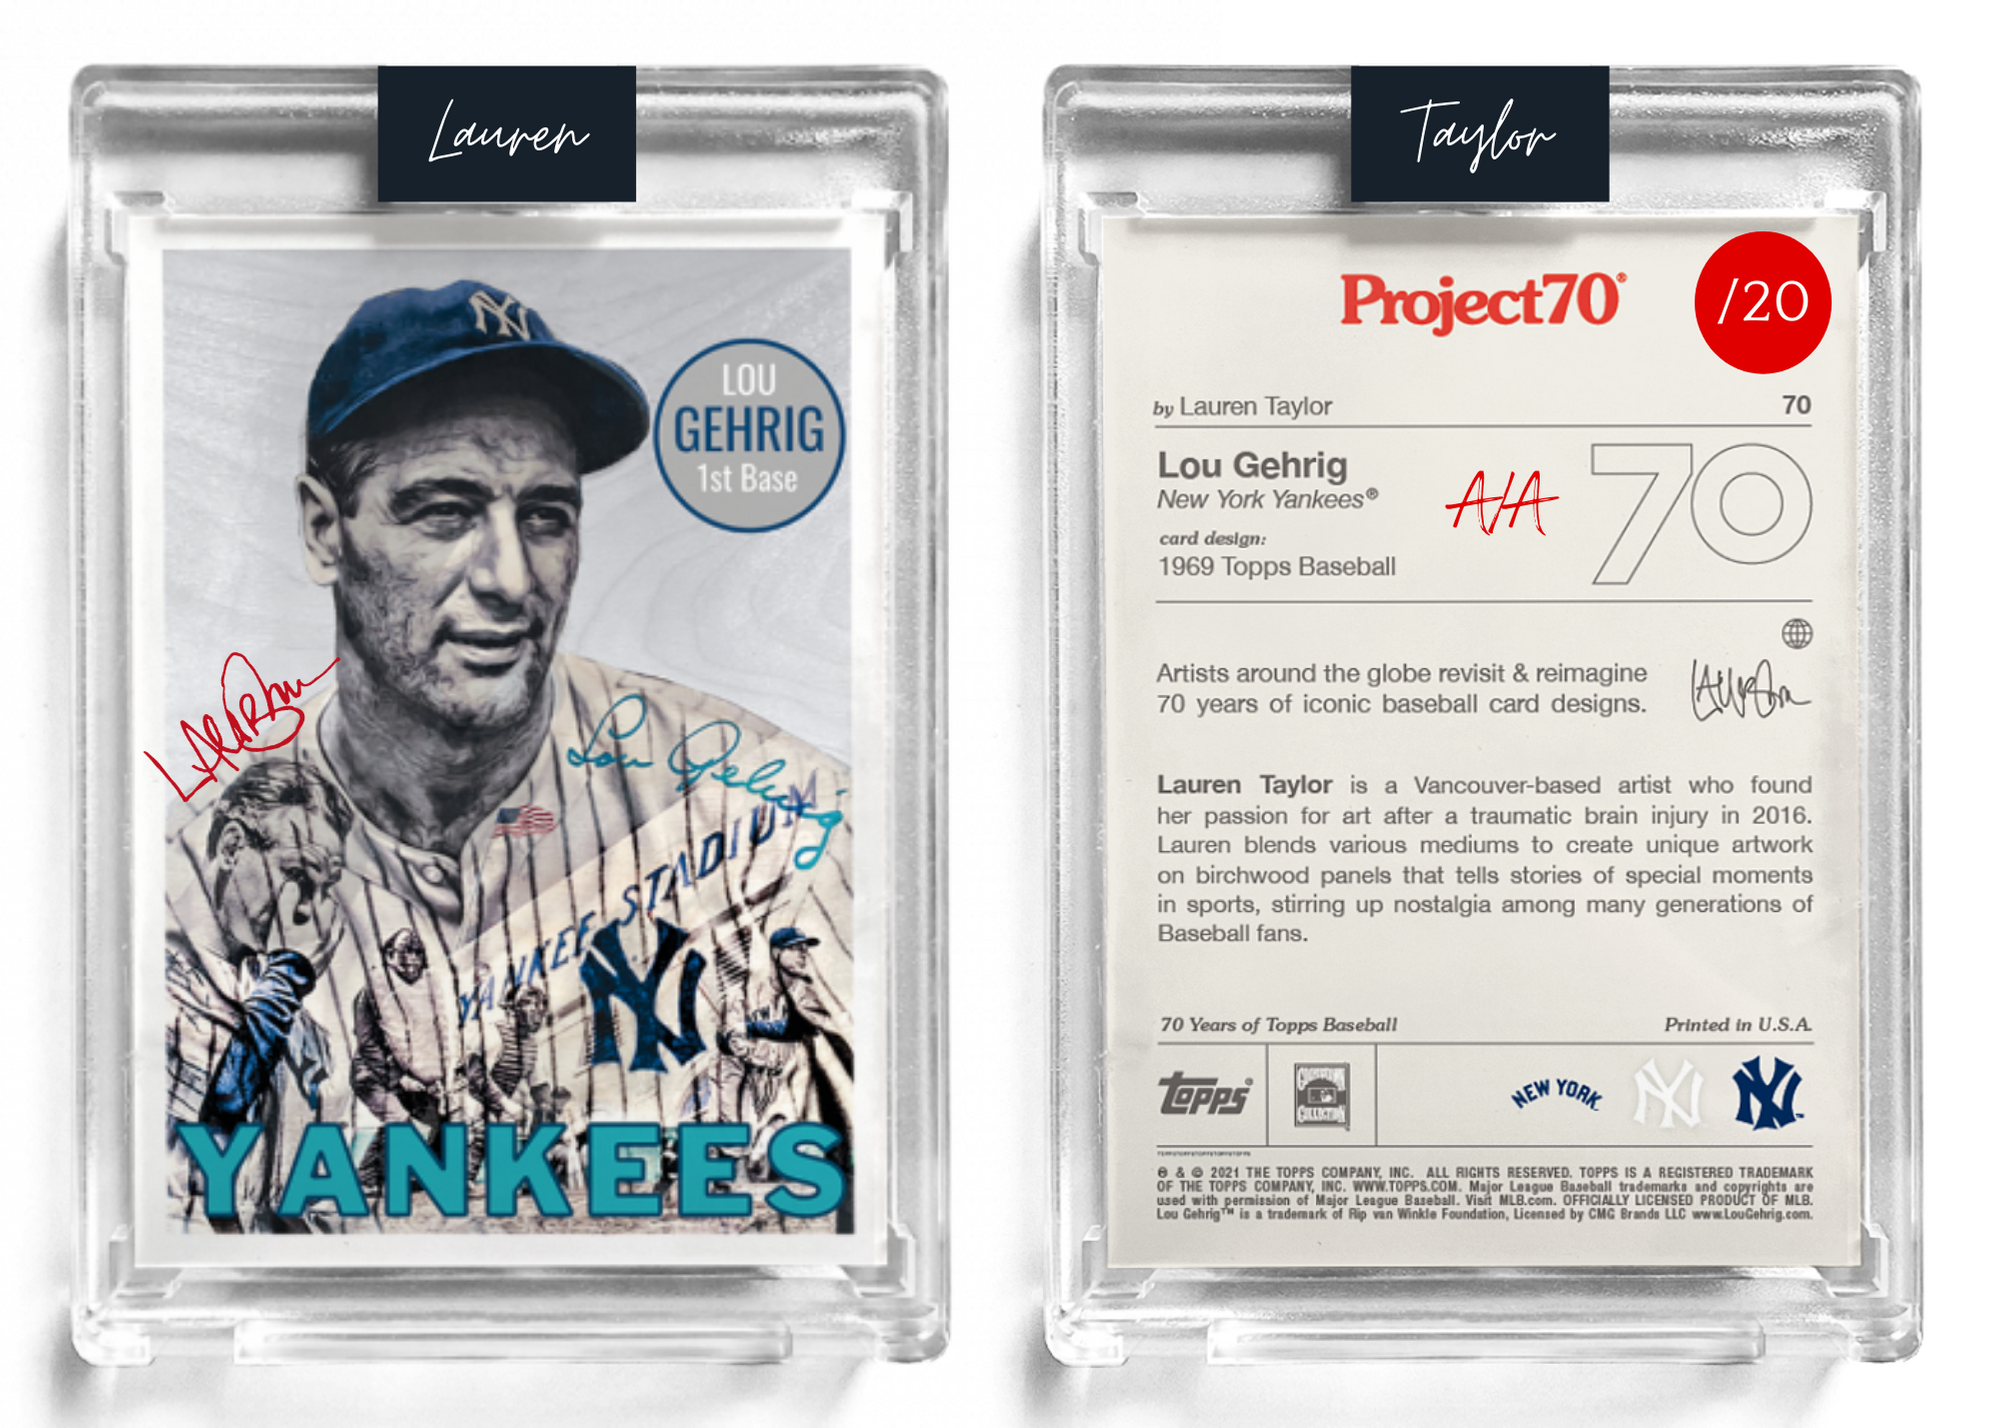 /20 Red Artist Signature - Topps Project 70 130pt card #70 by Lauren Taylor - Lou Gehrig